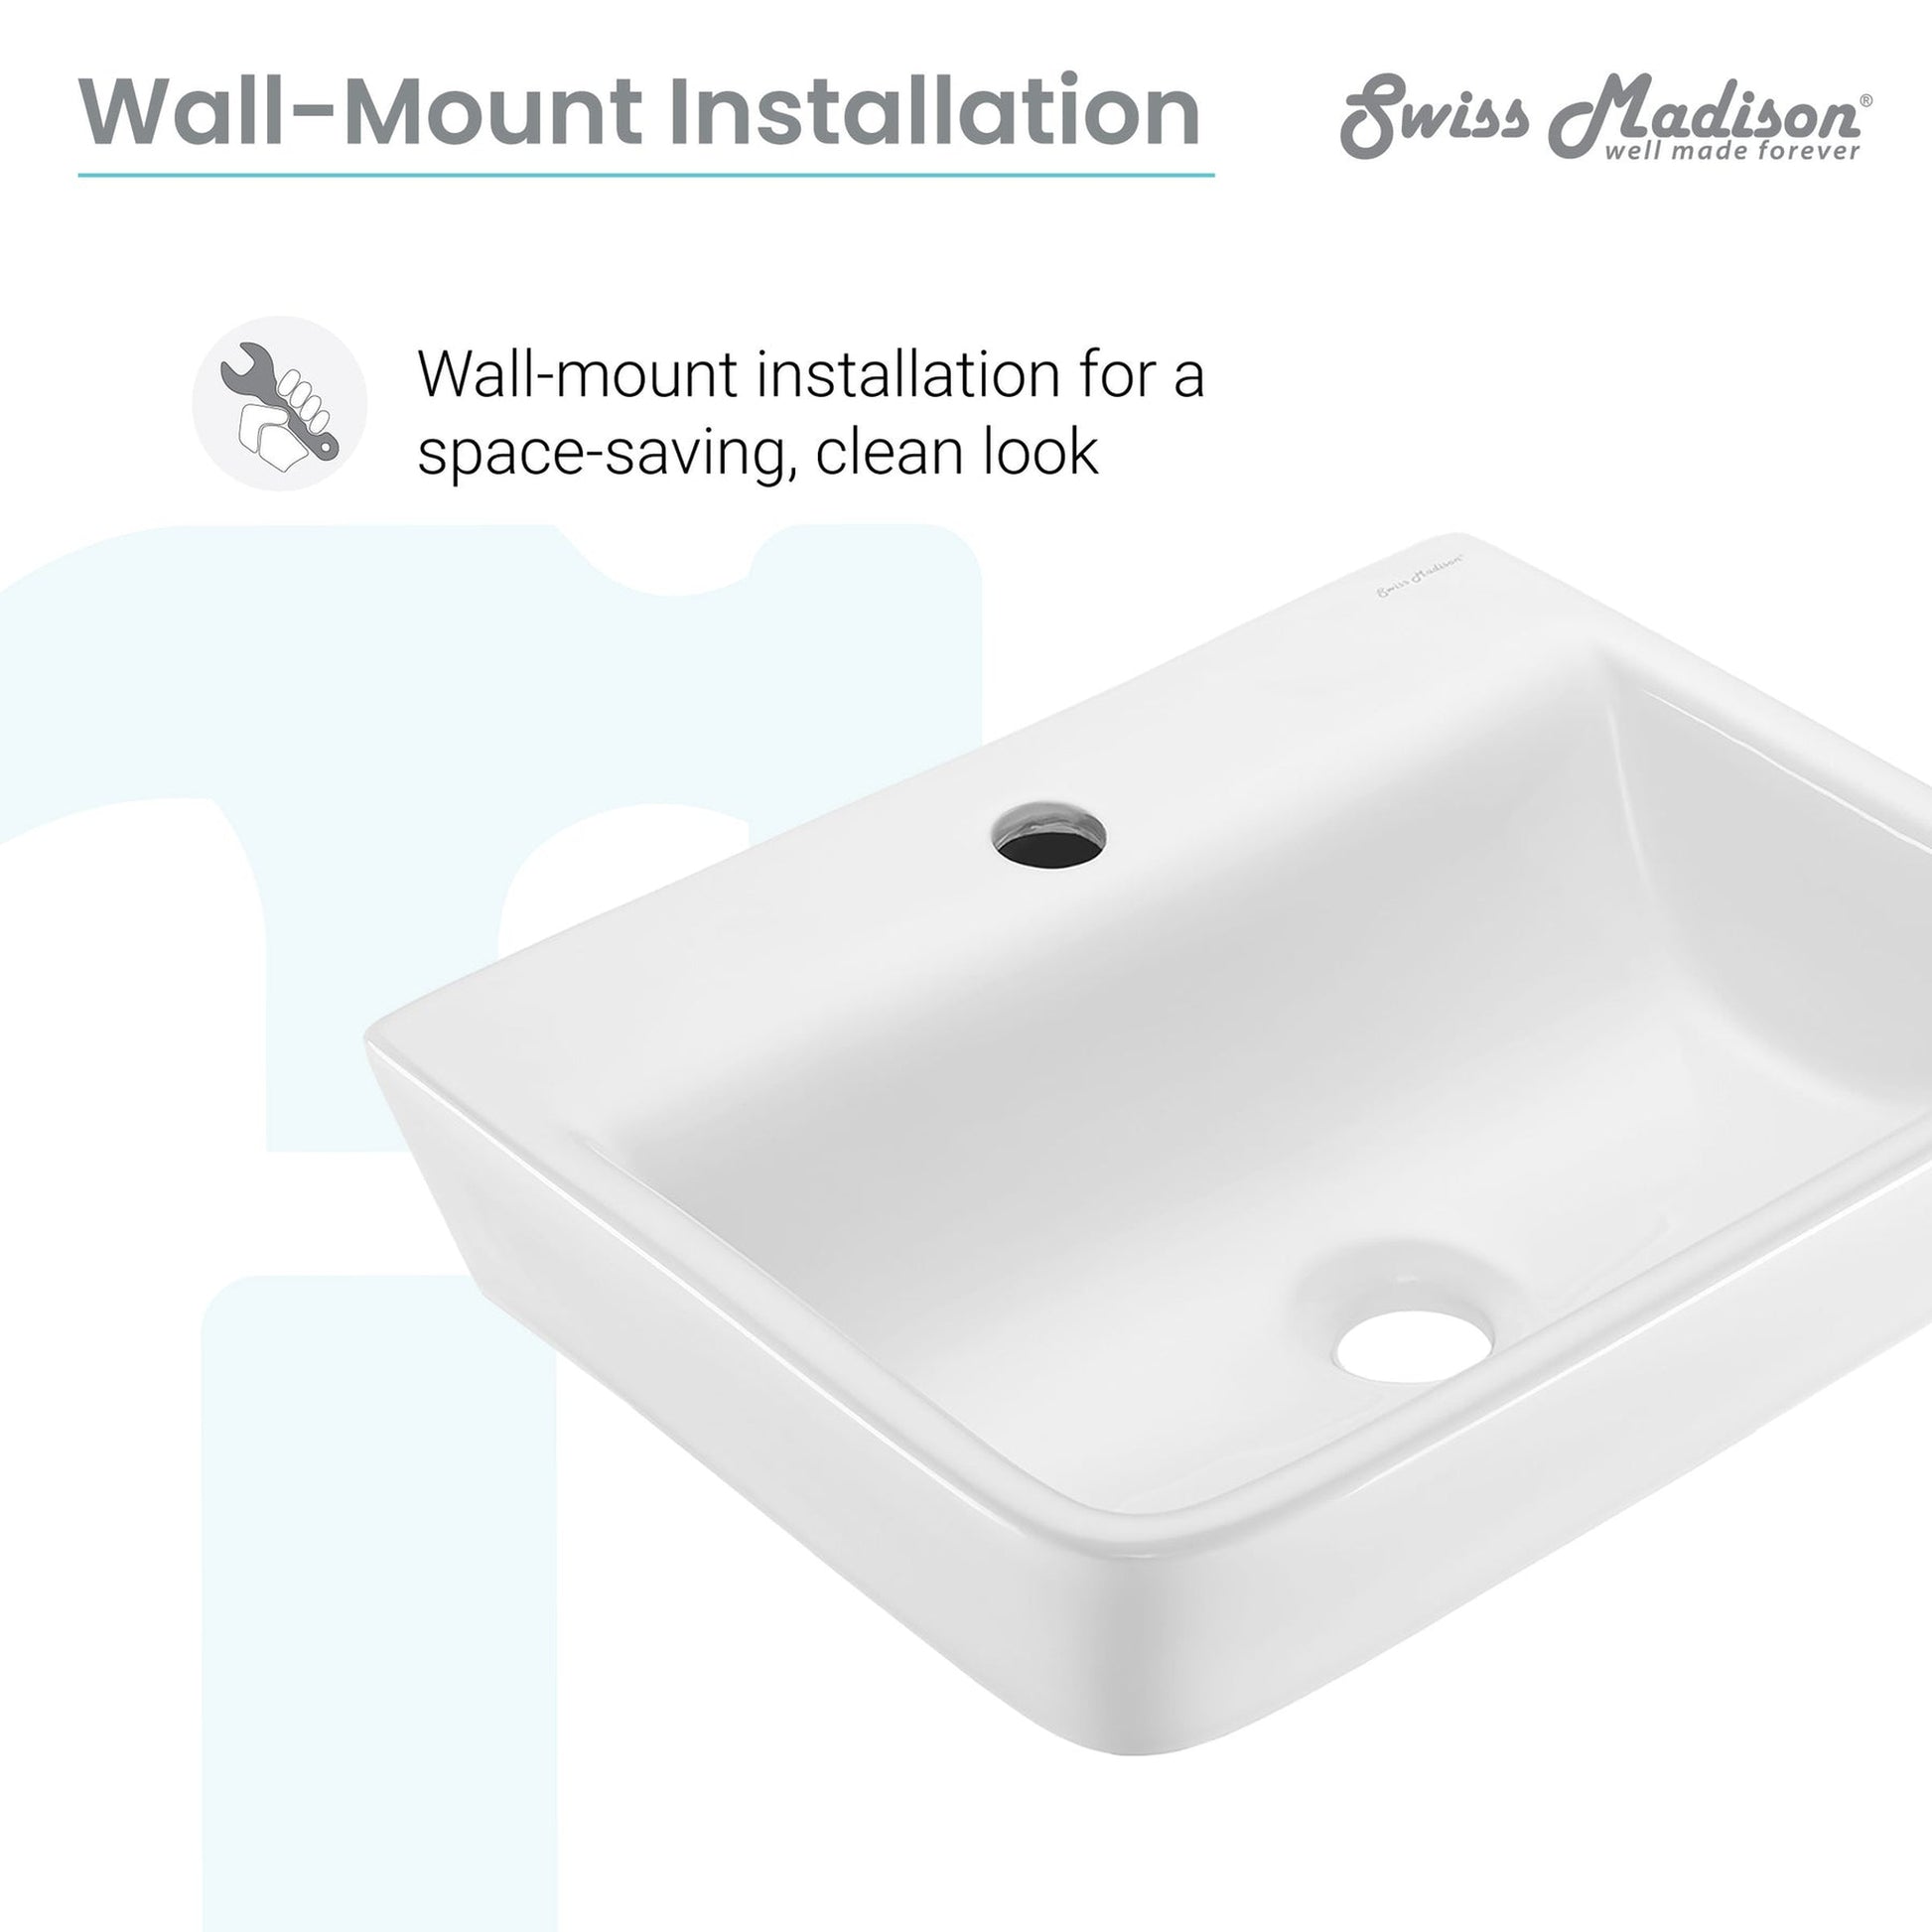 Swiss Madison St. Tropez 18" x 13" Rectangular White Ceramic Wall-Hung Bathroom Sink With Single Hole Faucet